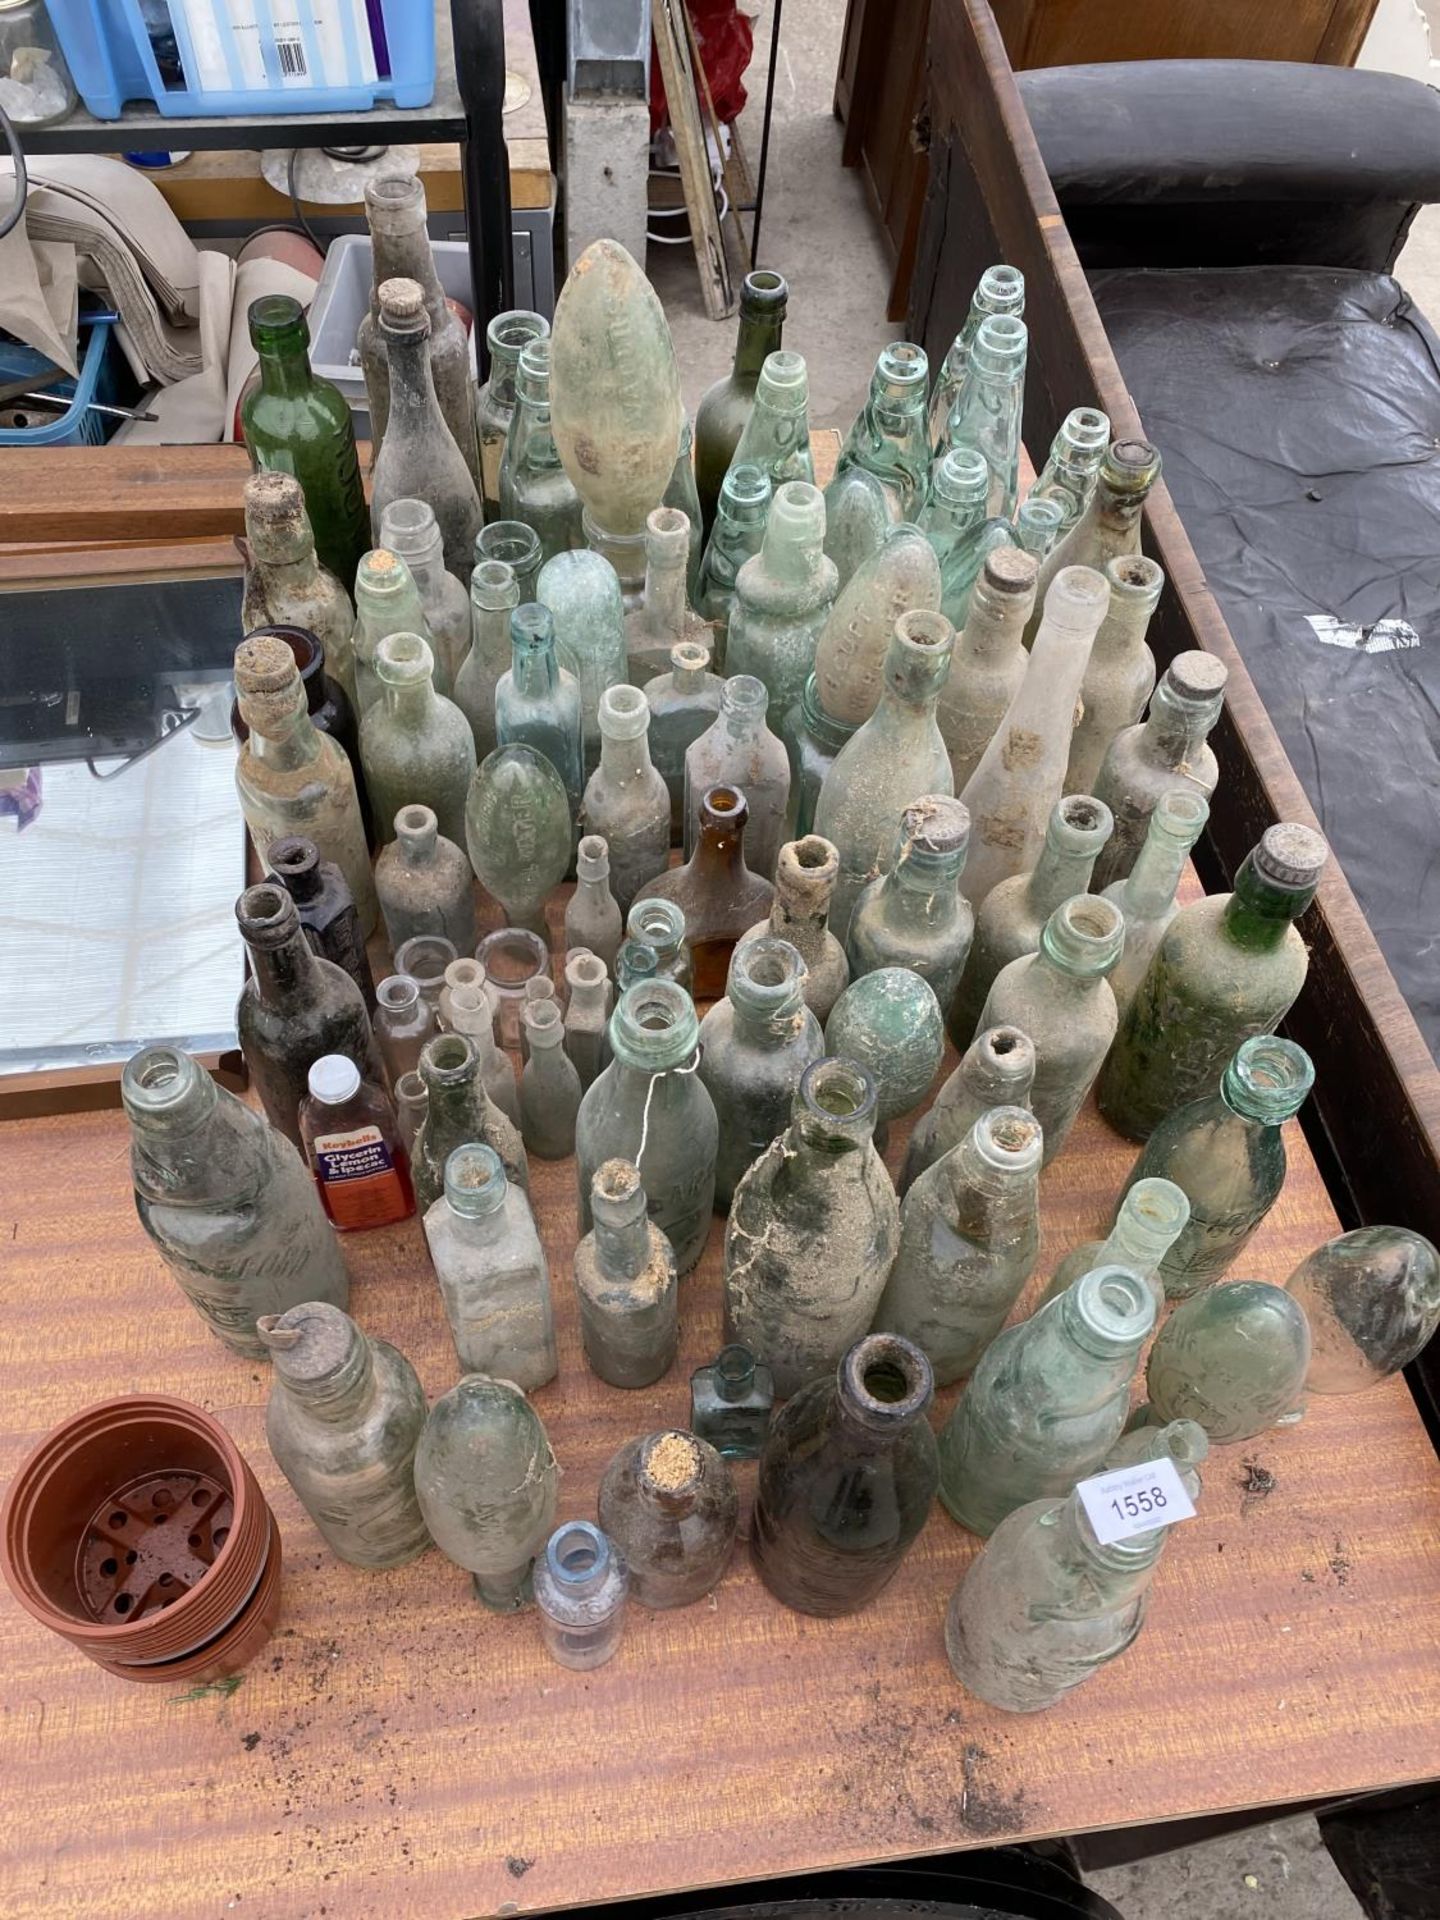 A LARGE QUANTITY OF VINTAGE GLASS BOTTLES SOME BEARING NAMES